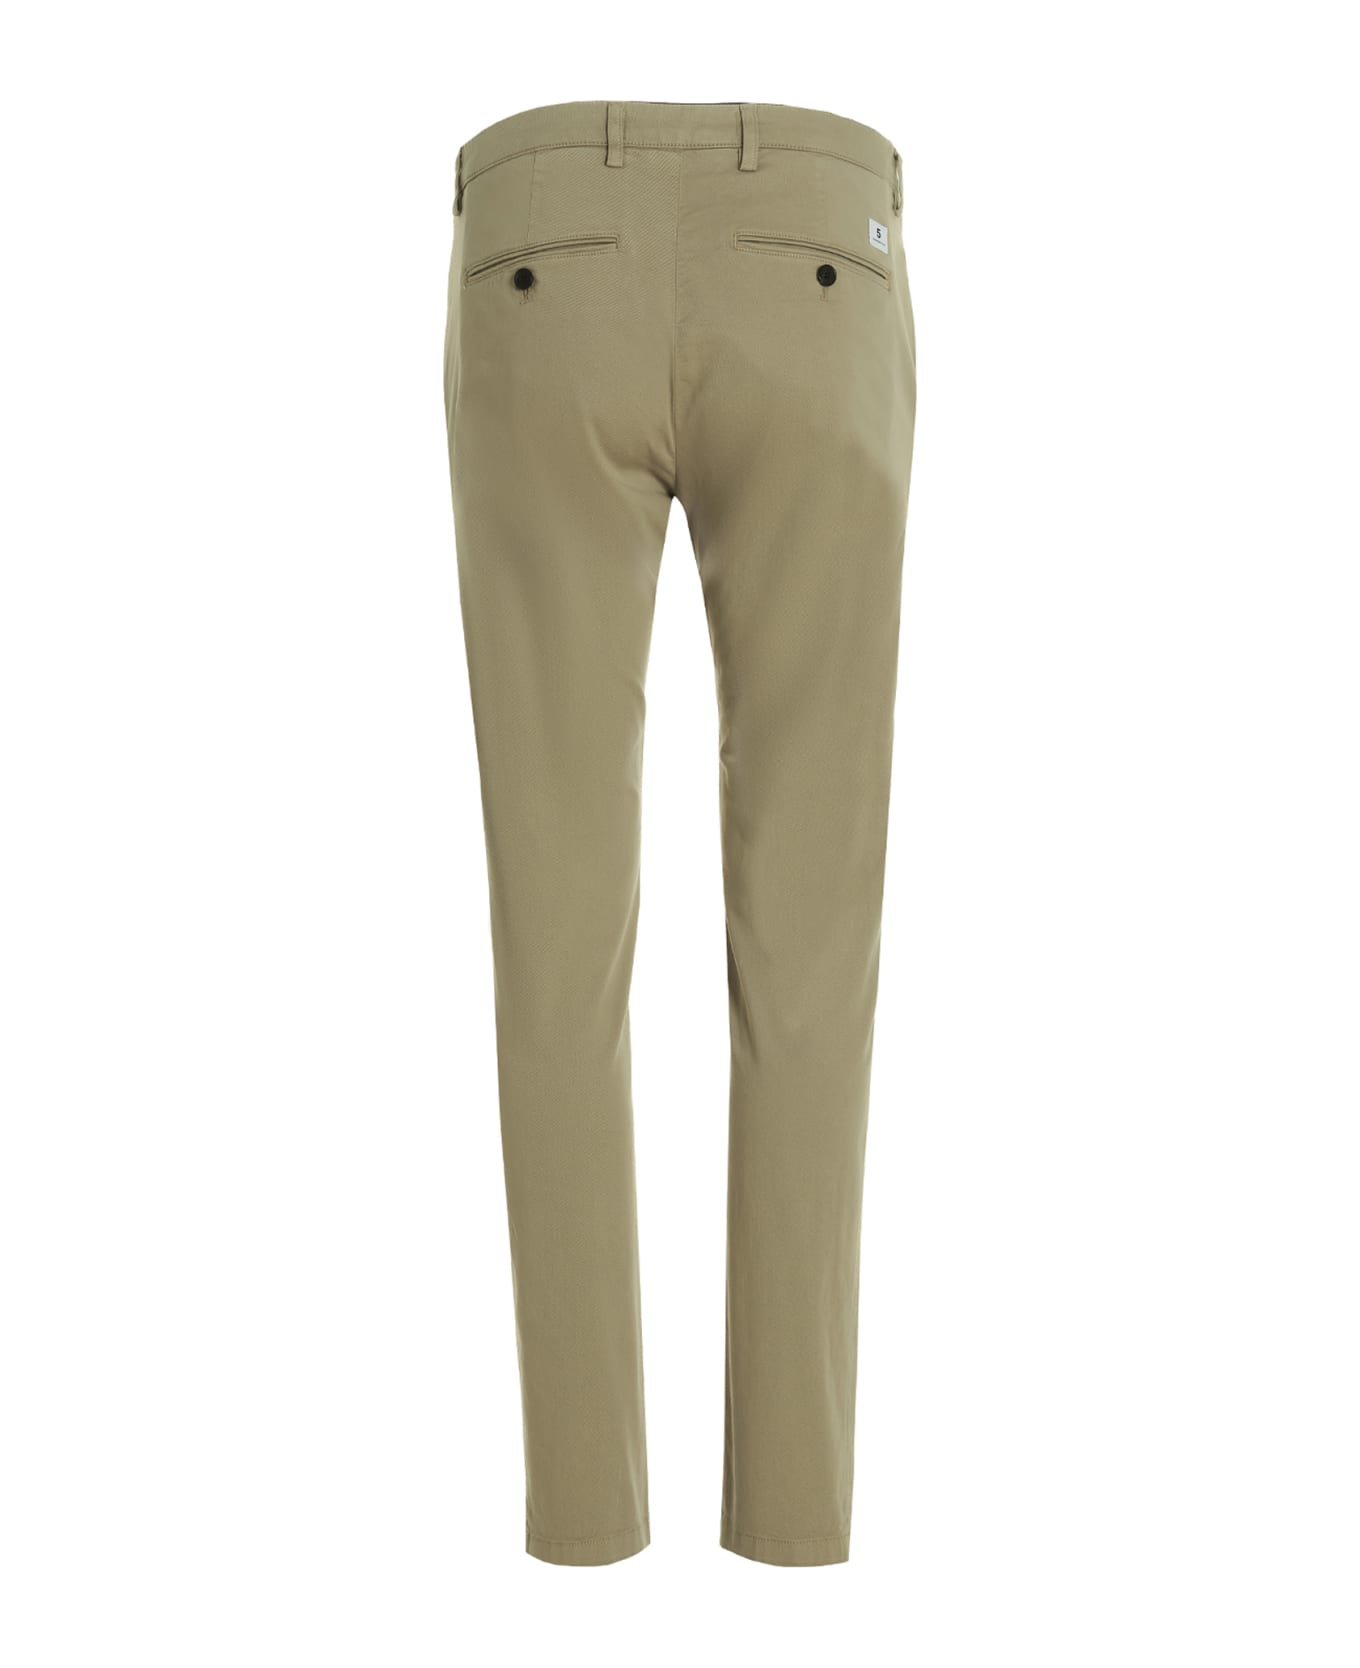 Department Five 'mike' Pants - BEIGE ボトムス